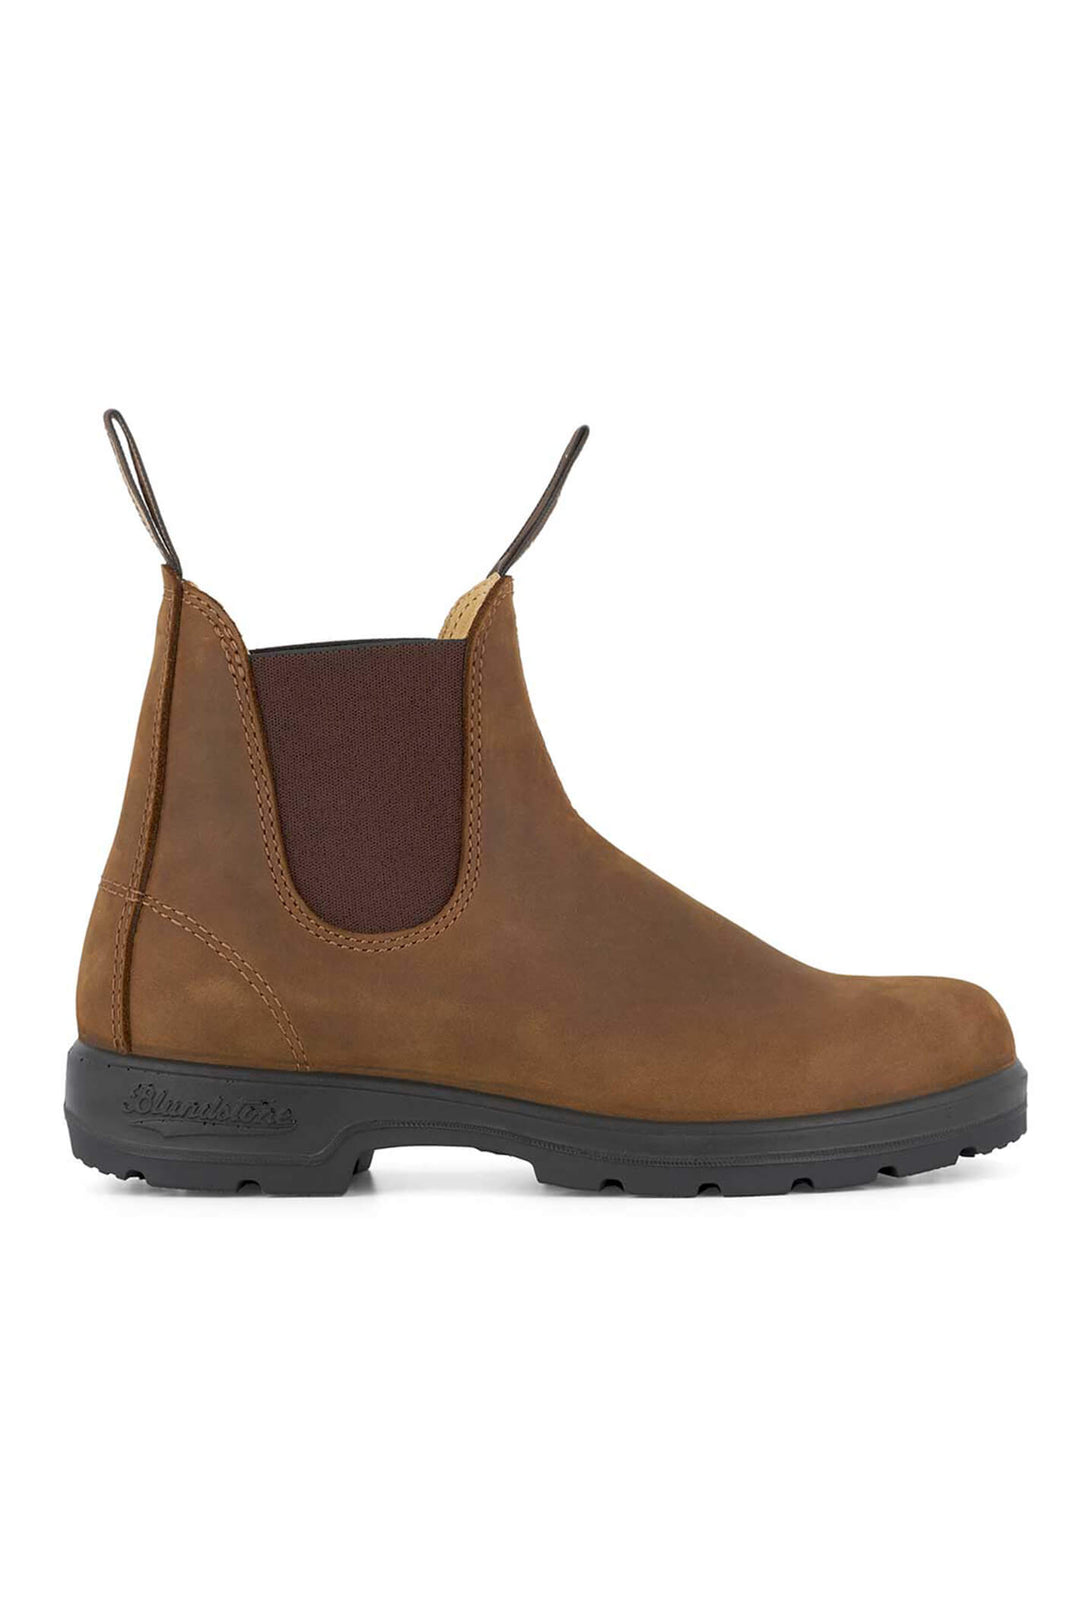 Blundstone 562 Brown Water-Resistant Boot - Shirley Allum Boutique